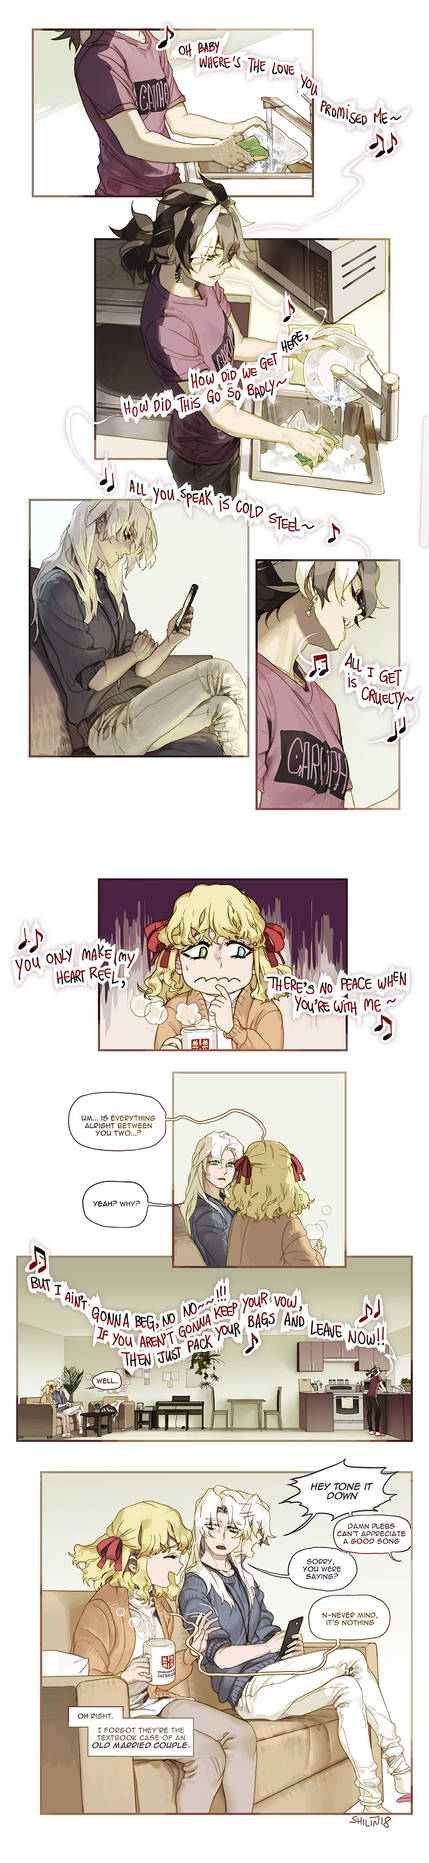 Amongst Us 11. Text (3) by shilin on DeviantArt